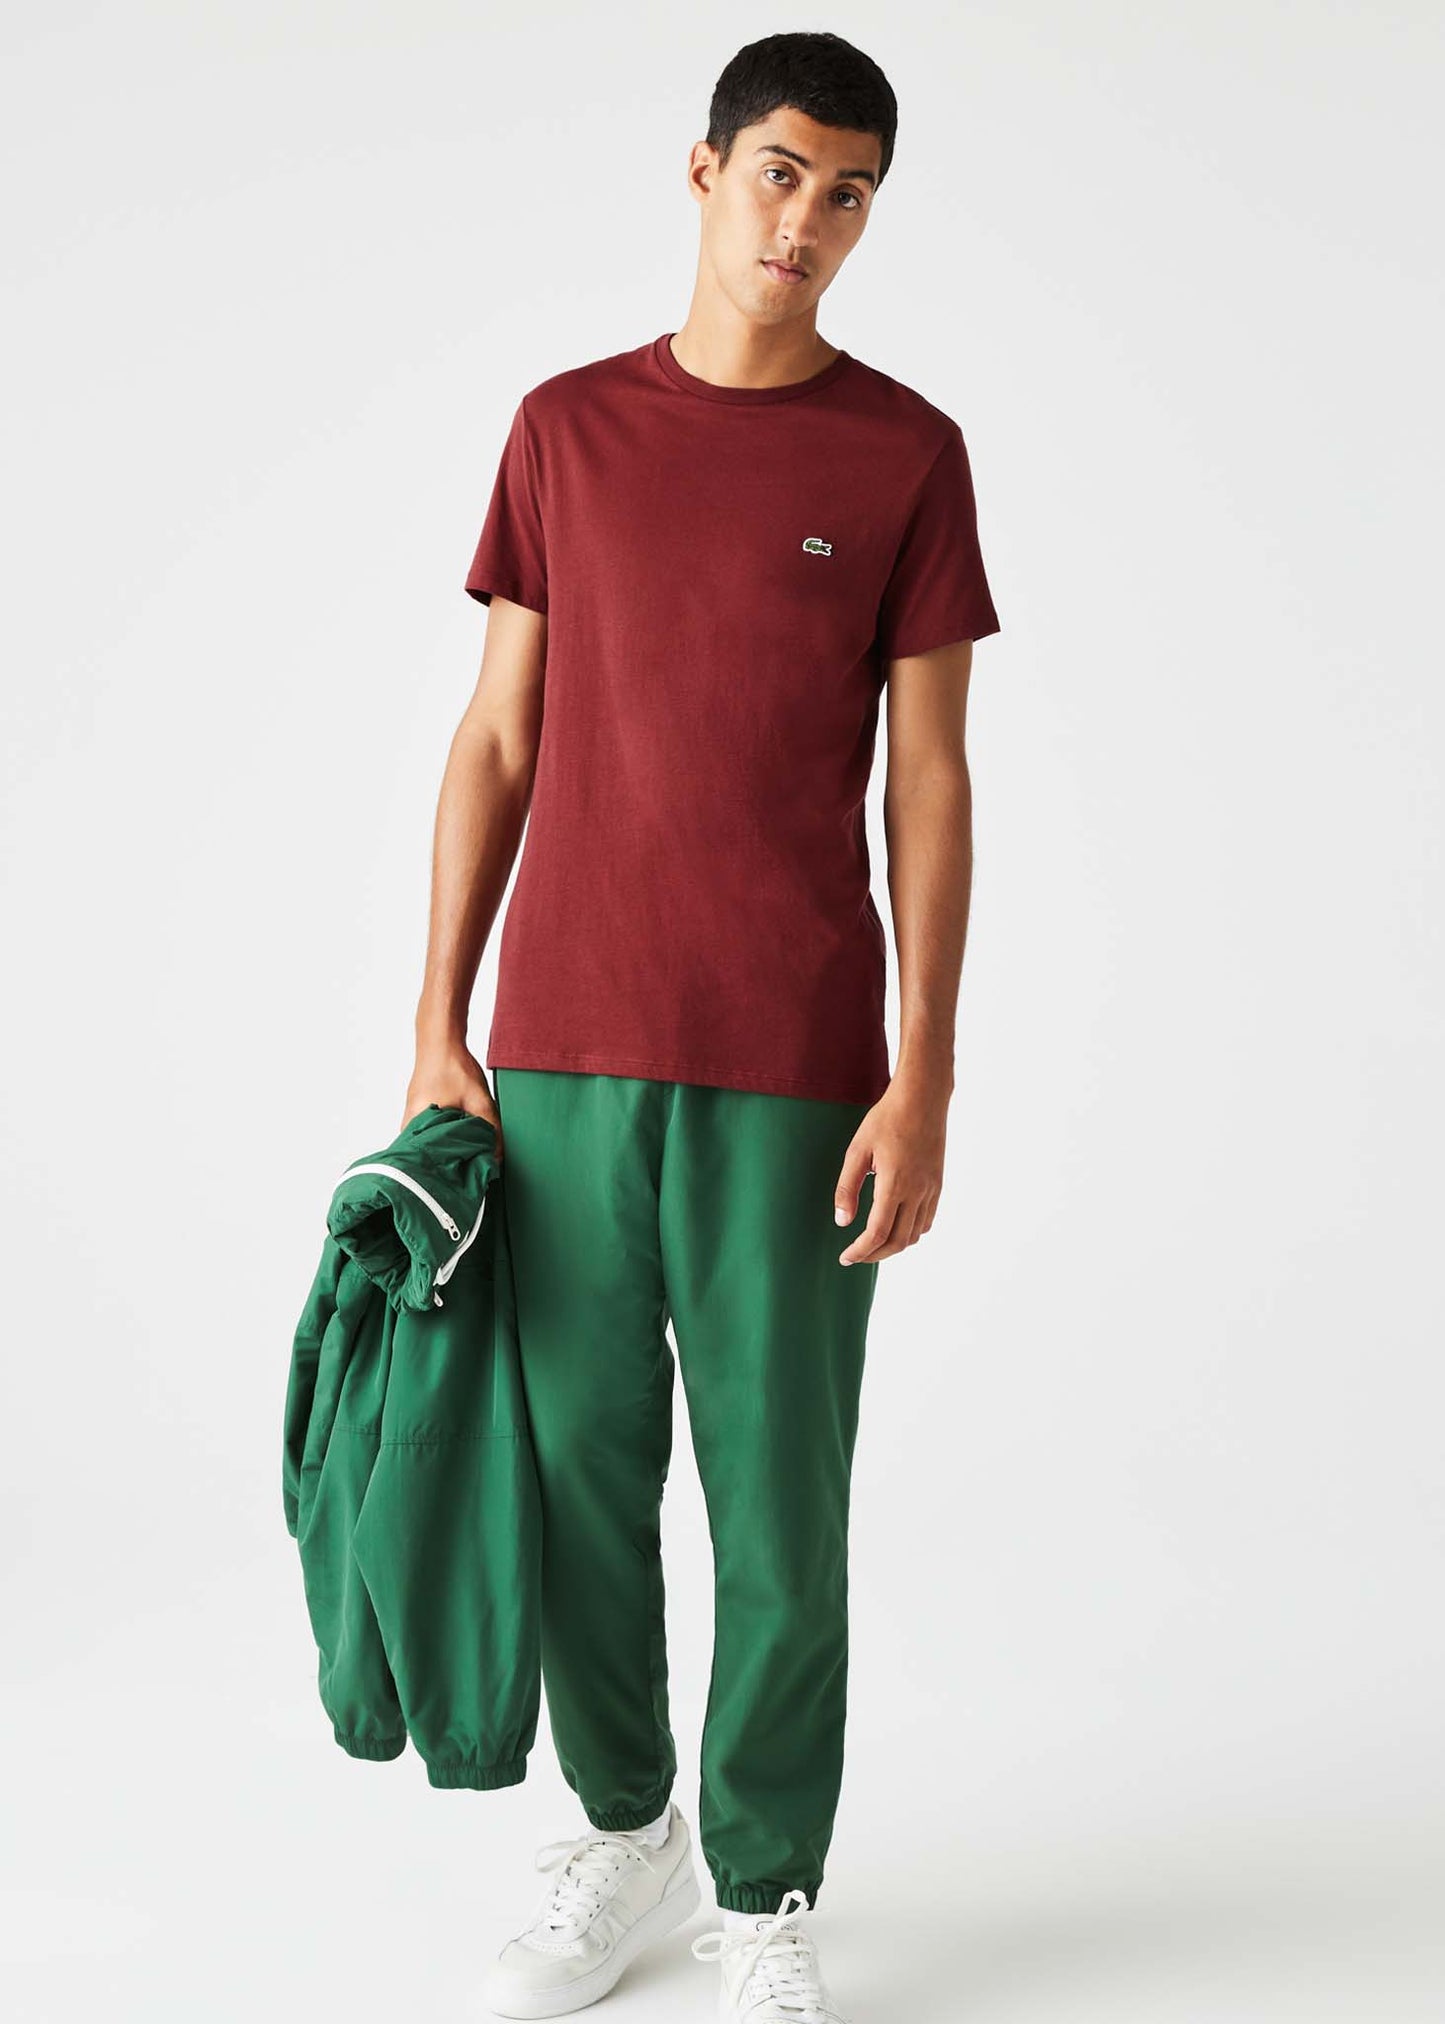 Lacoste t-shirt cranberry red